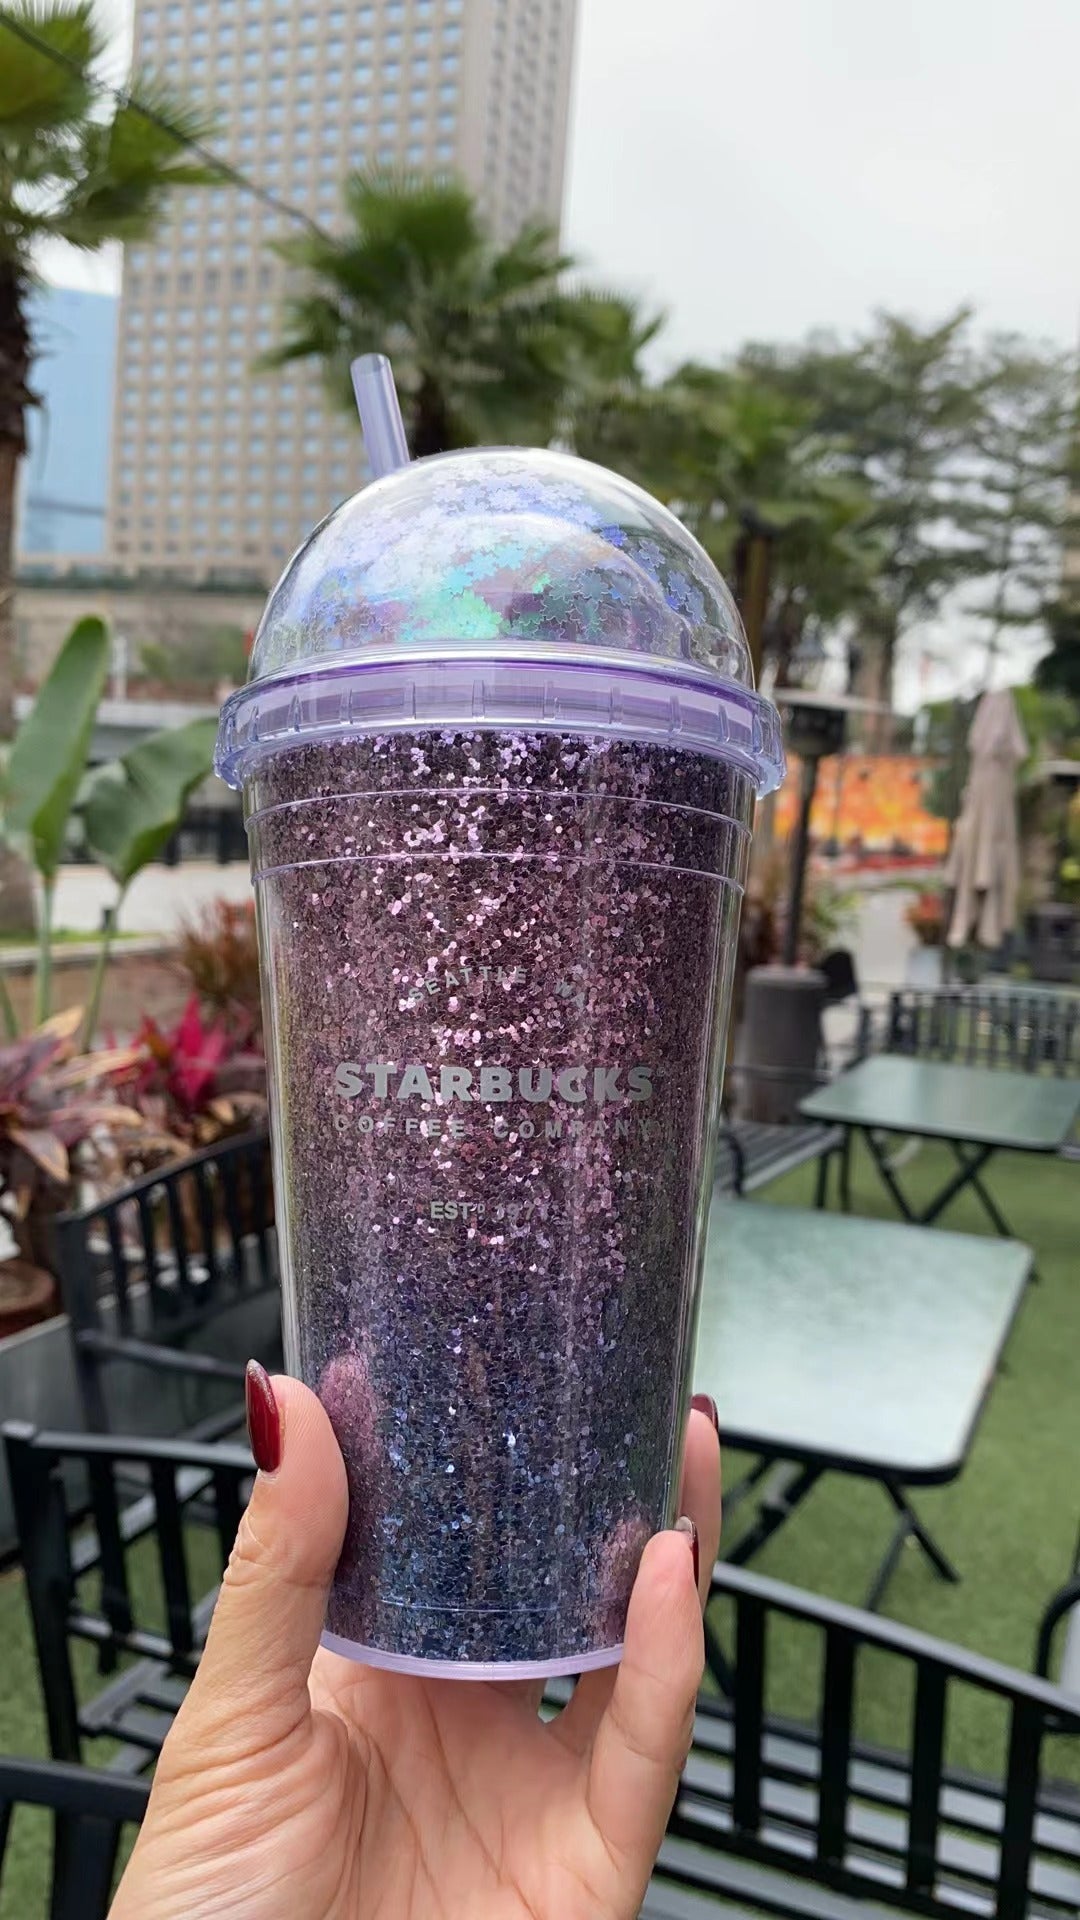 You Can Get A Starbucks Cup That Is Covered In Glitter and Glam